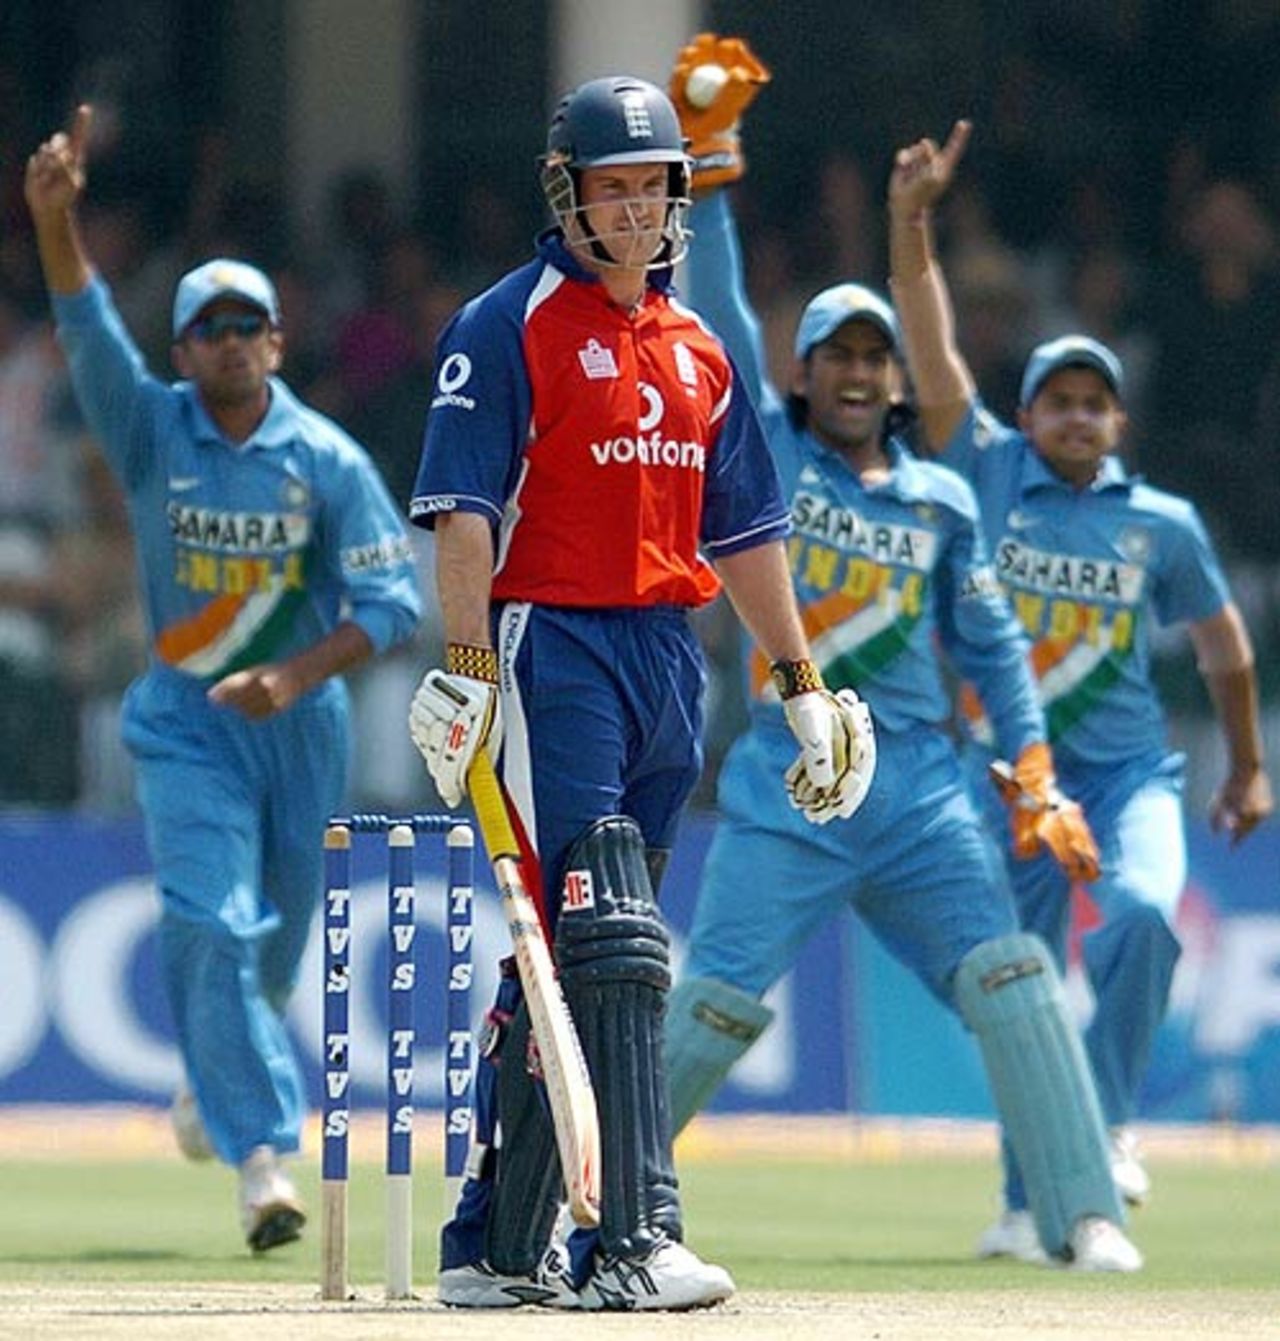 The Indian contingent behind the wicket appeal for the wicket of Andrew Strauss, India v England, 1st ODI, New Delhi, March 28 2006